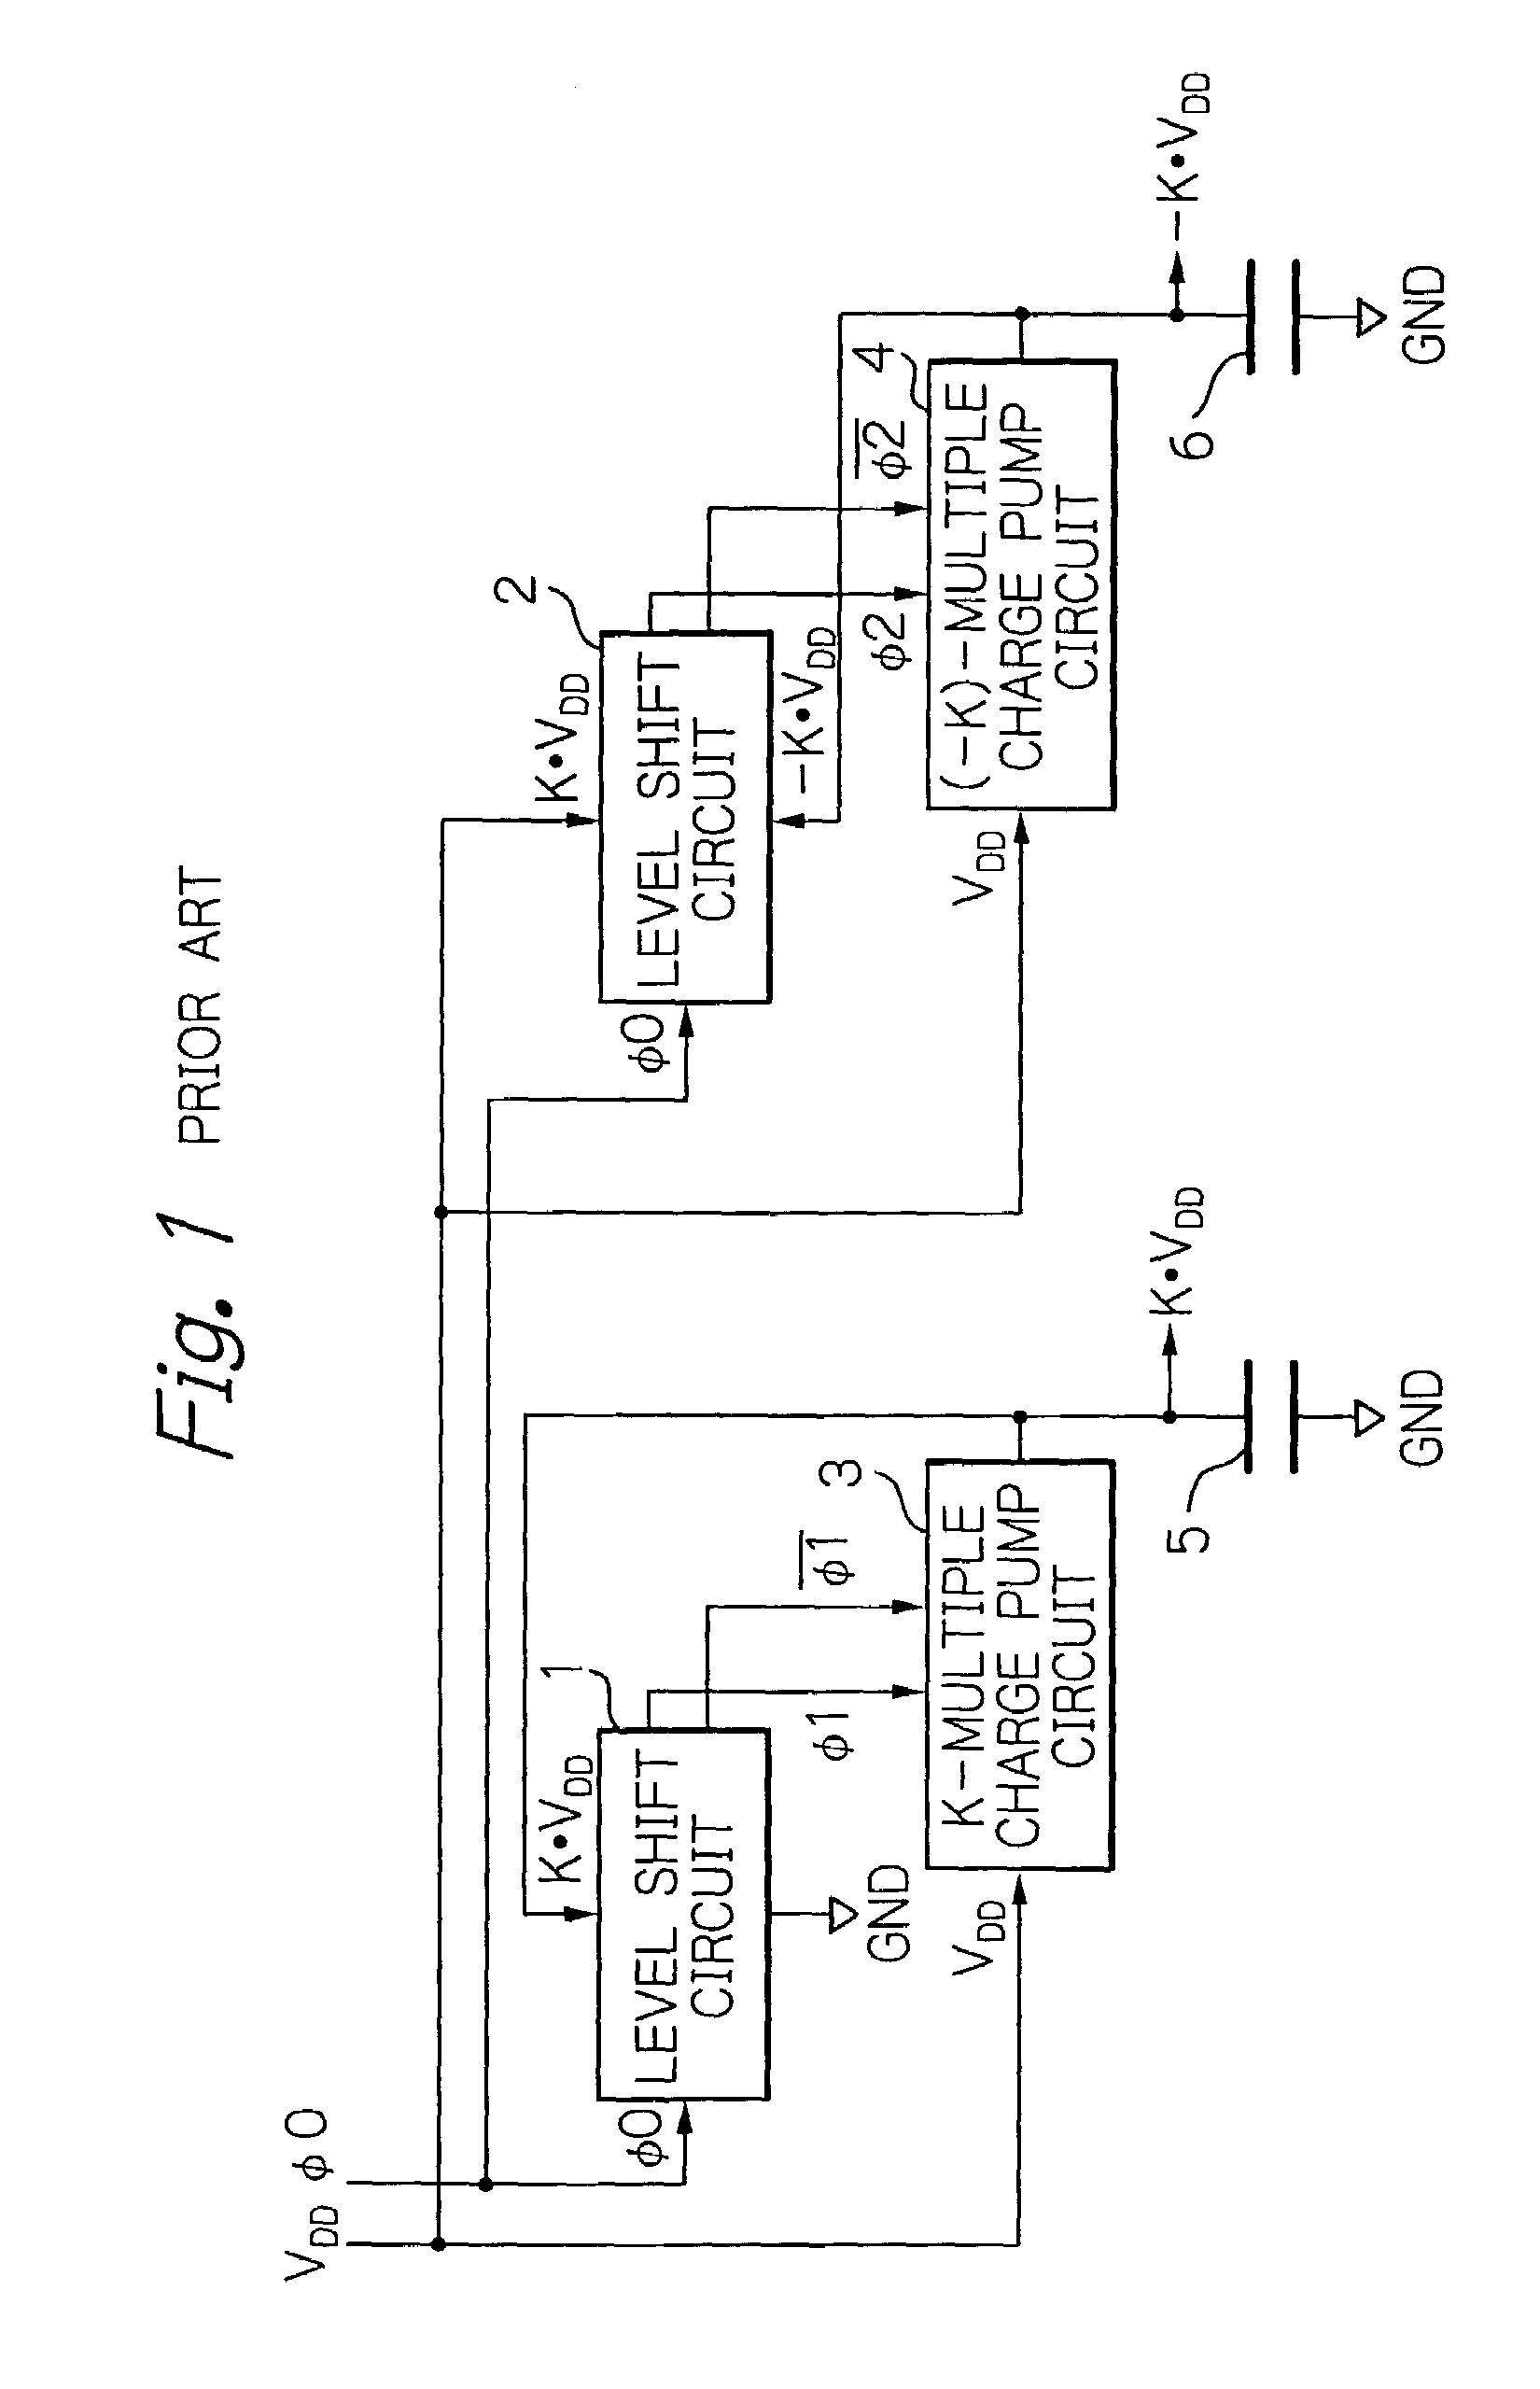 Simple step-up apparatus including level shift circuits capable of low breakdown voltage